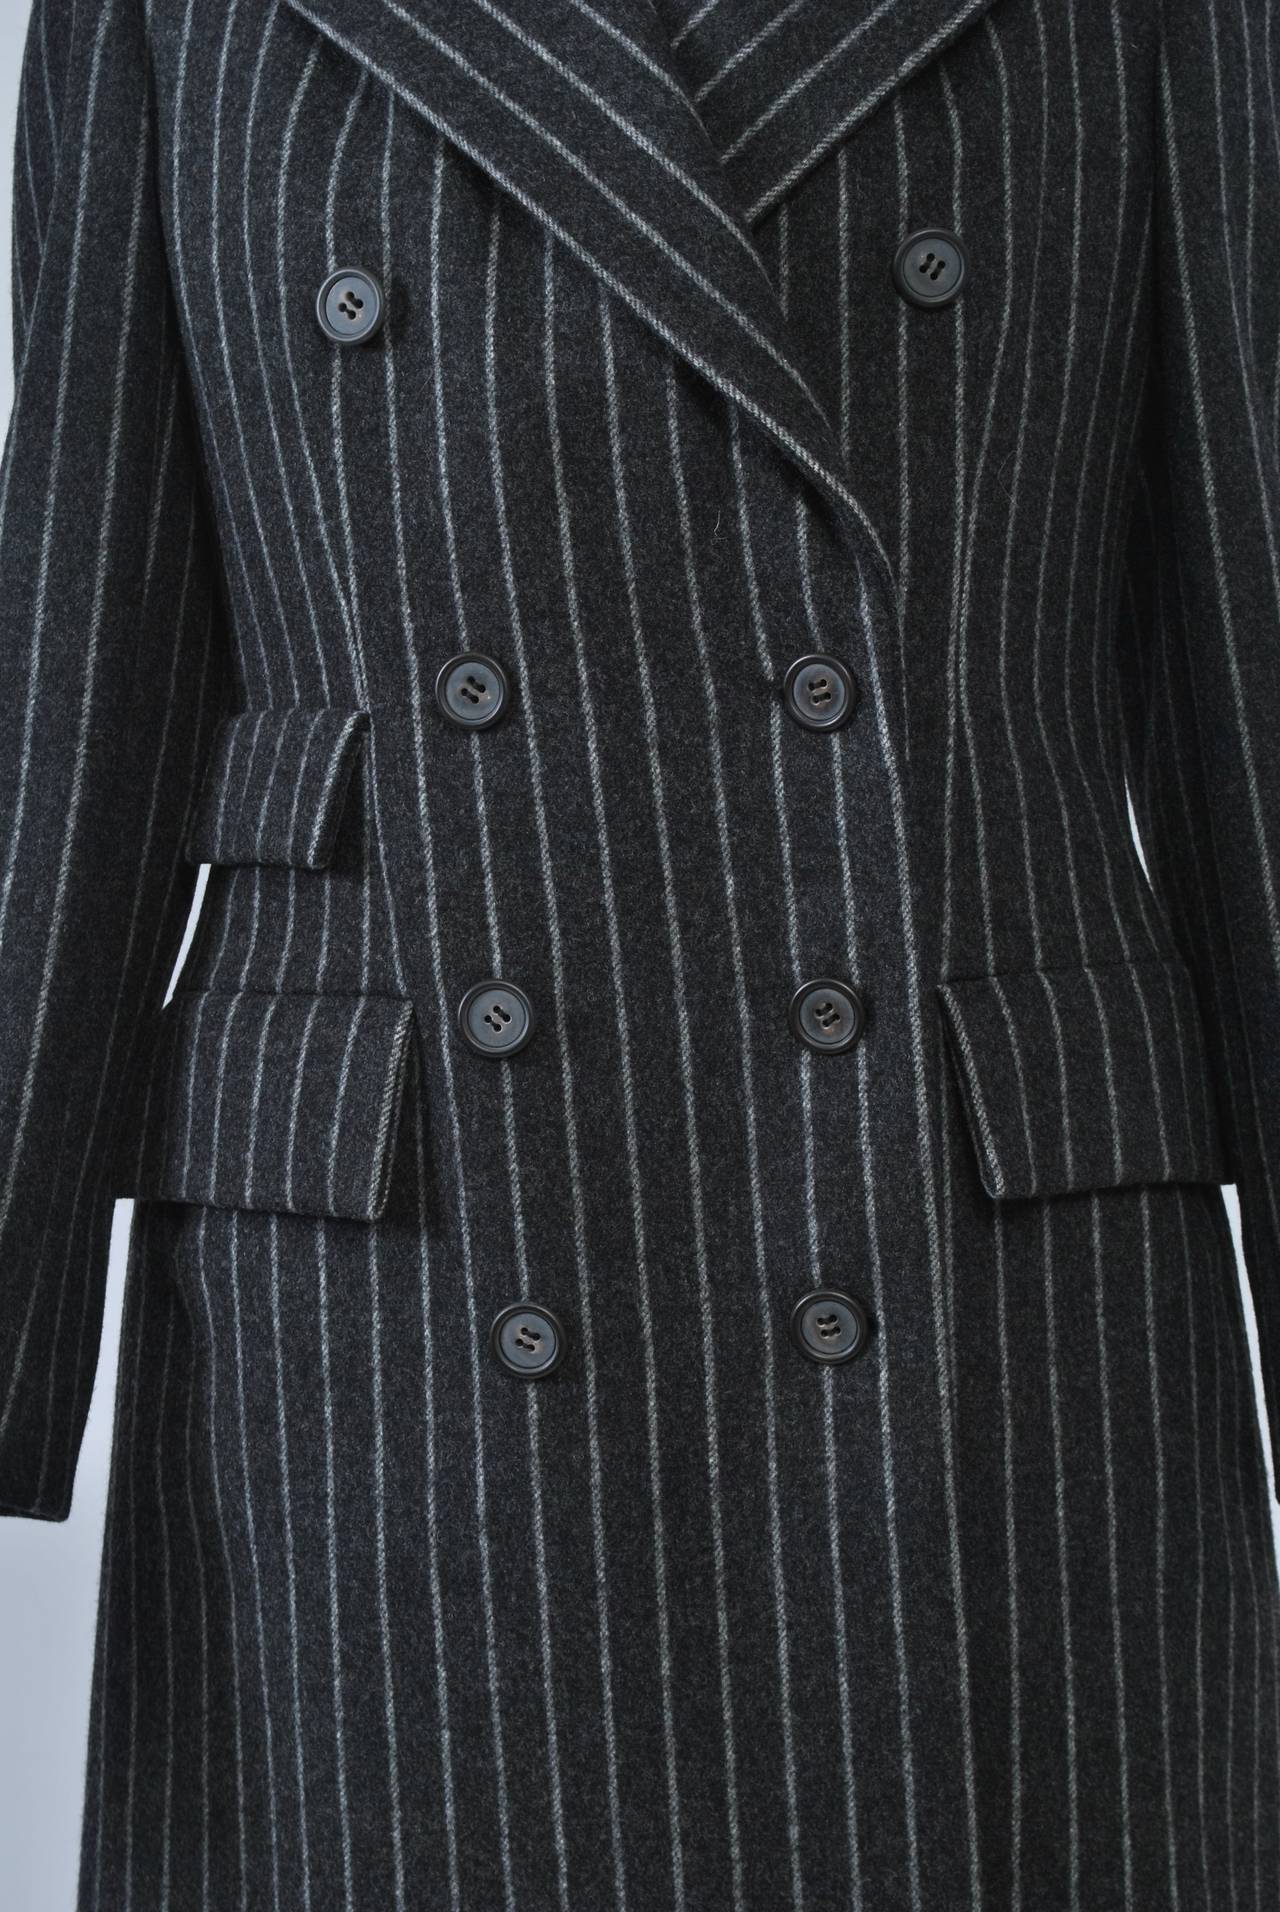 Bill Blass Pinstripe Coat Suit In Excellent Condition In Alford, MA